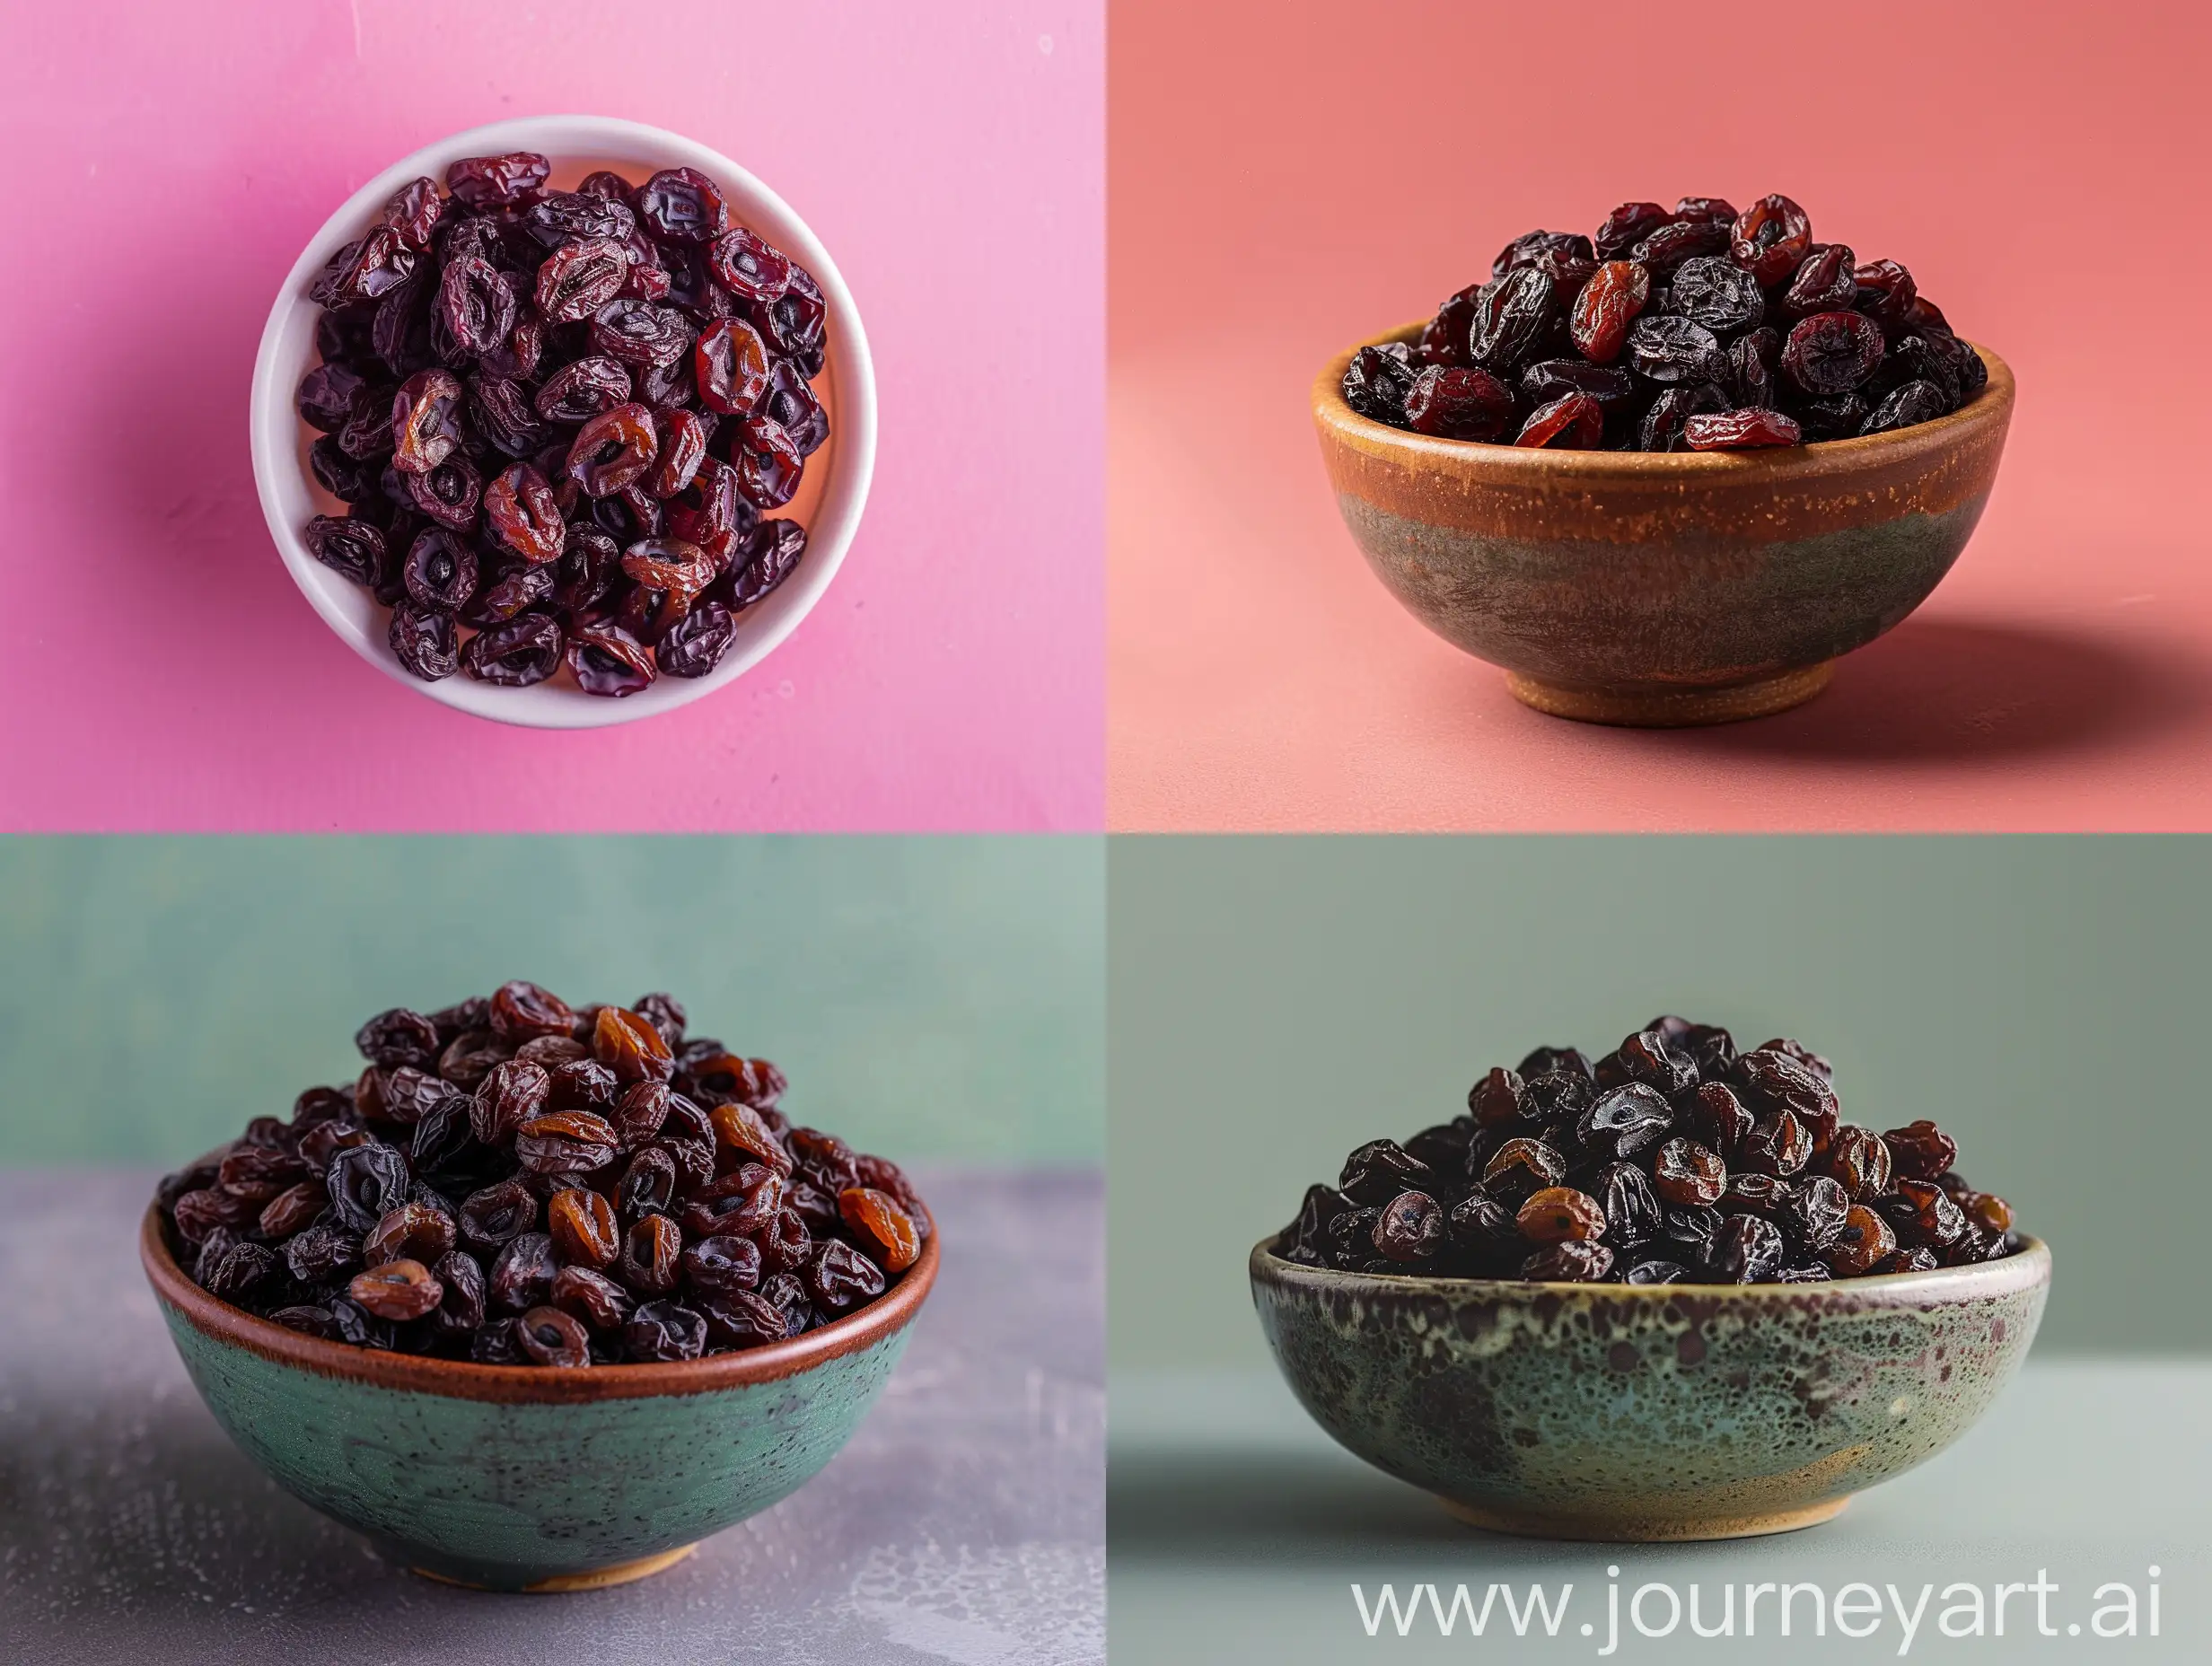 Studio photography with a background of one color of Raisins in a bowl